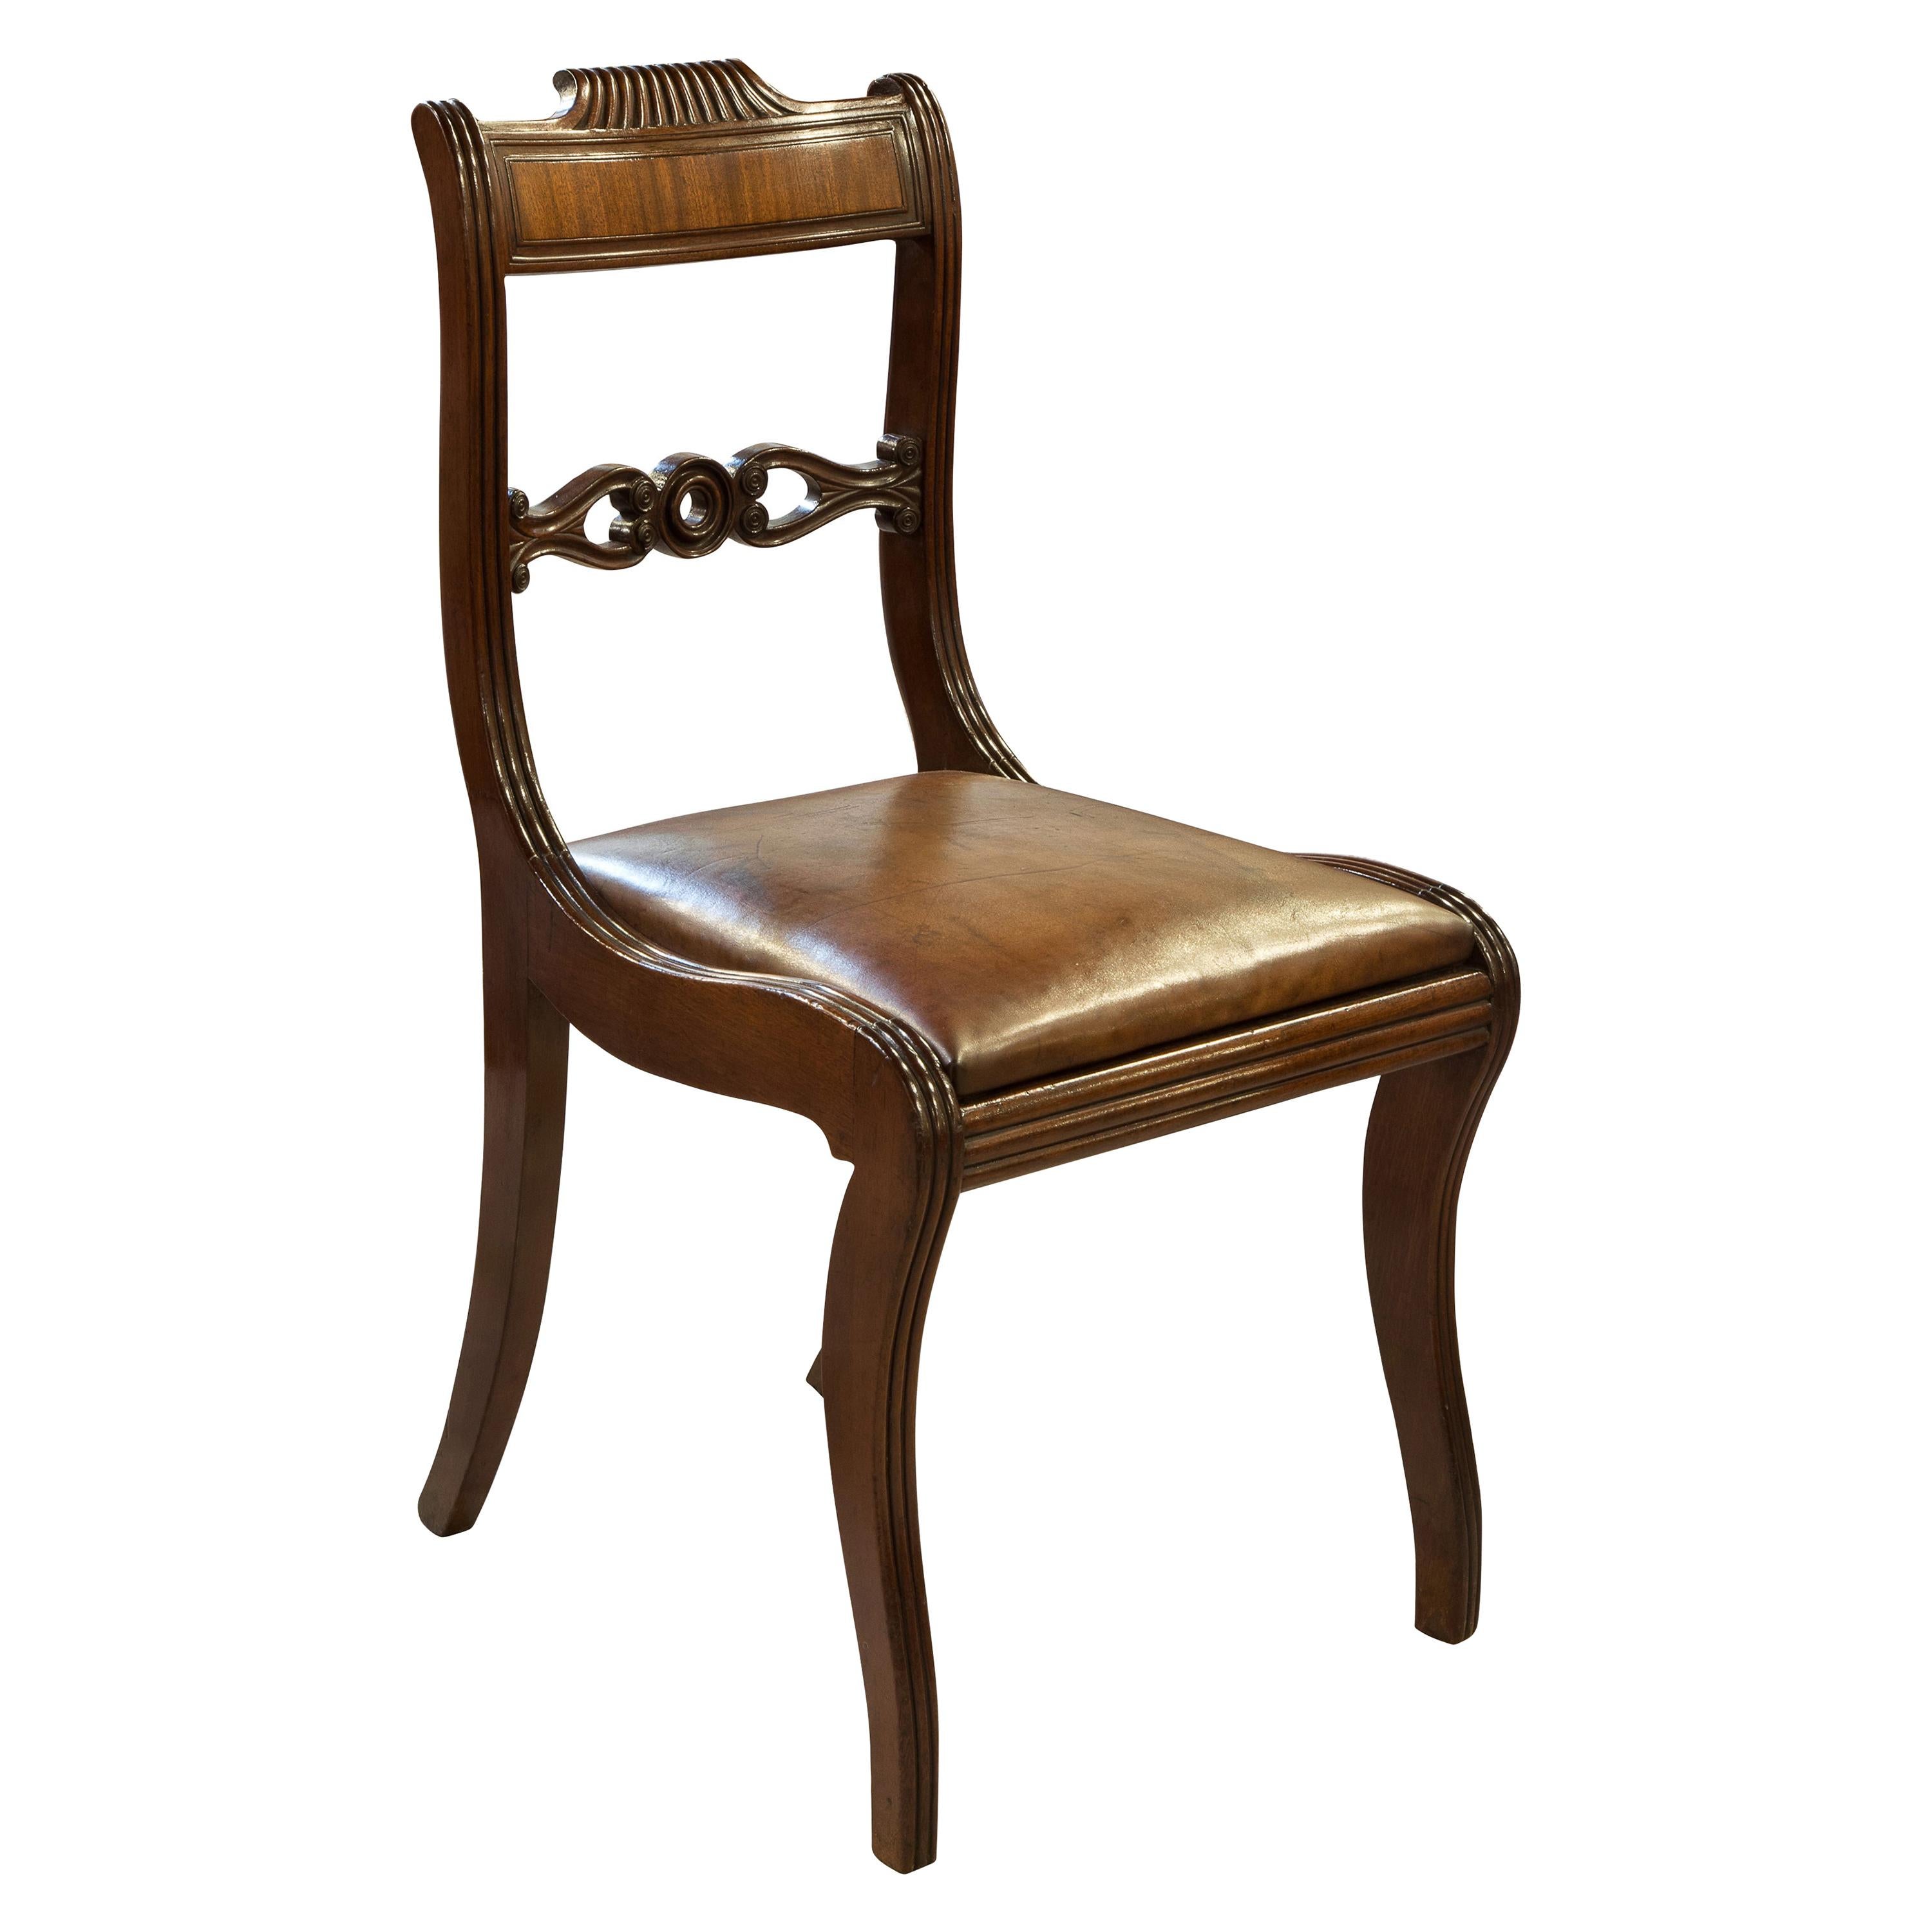 Regency Mahogany Chair with Leather Upholstered Seat, circa 1830 For Sale